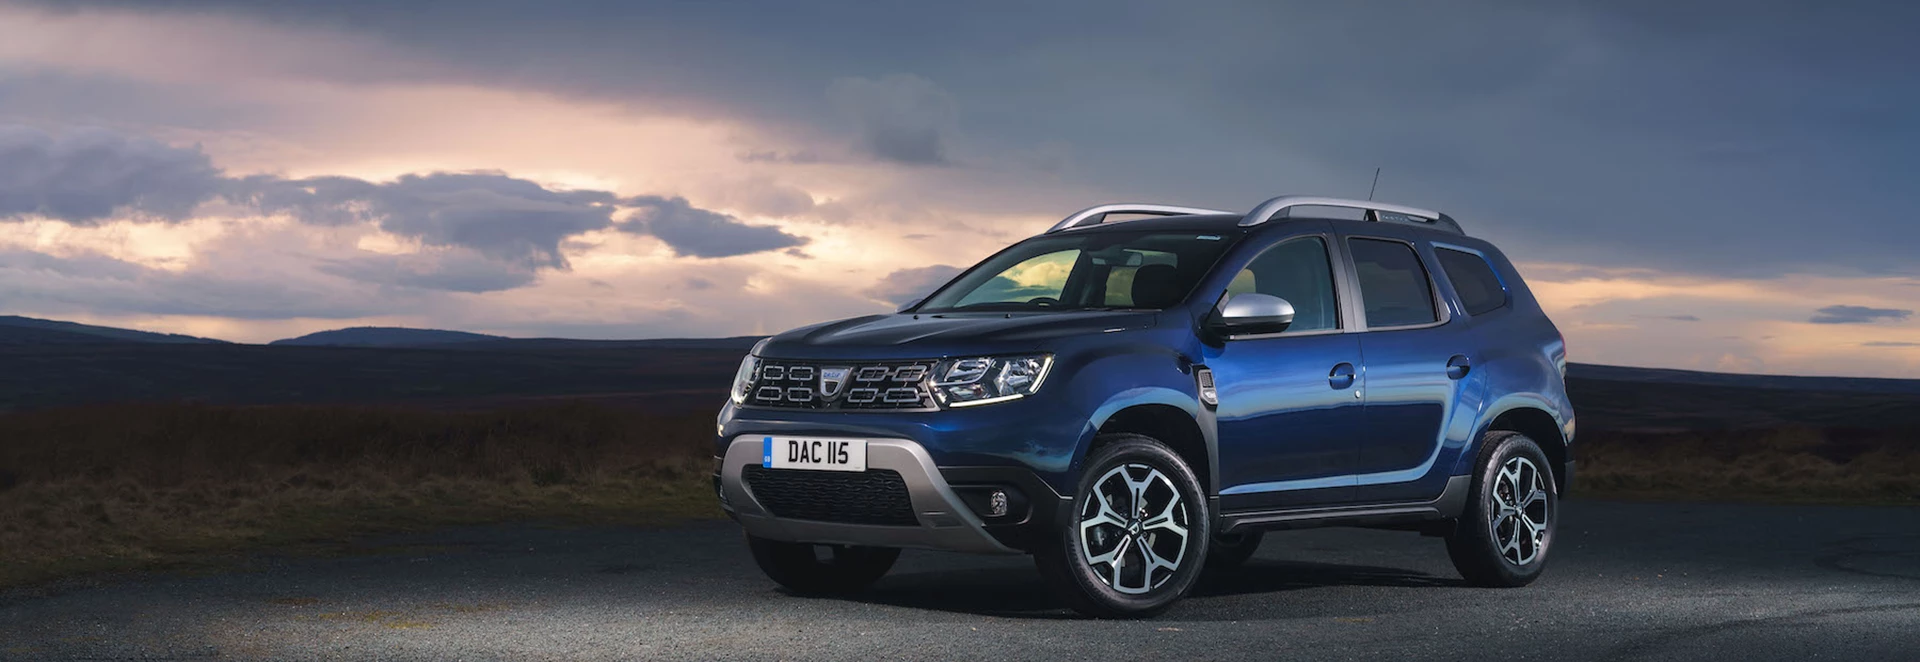 Here's why you should choose Dacia for your next new car 